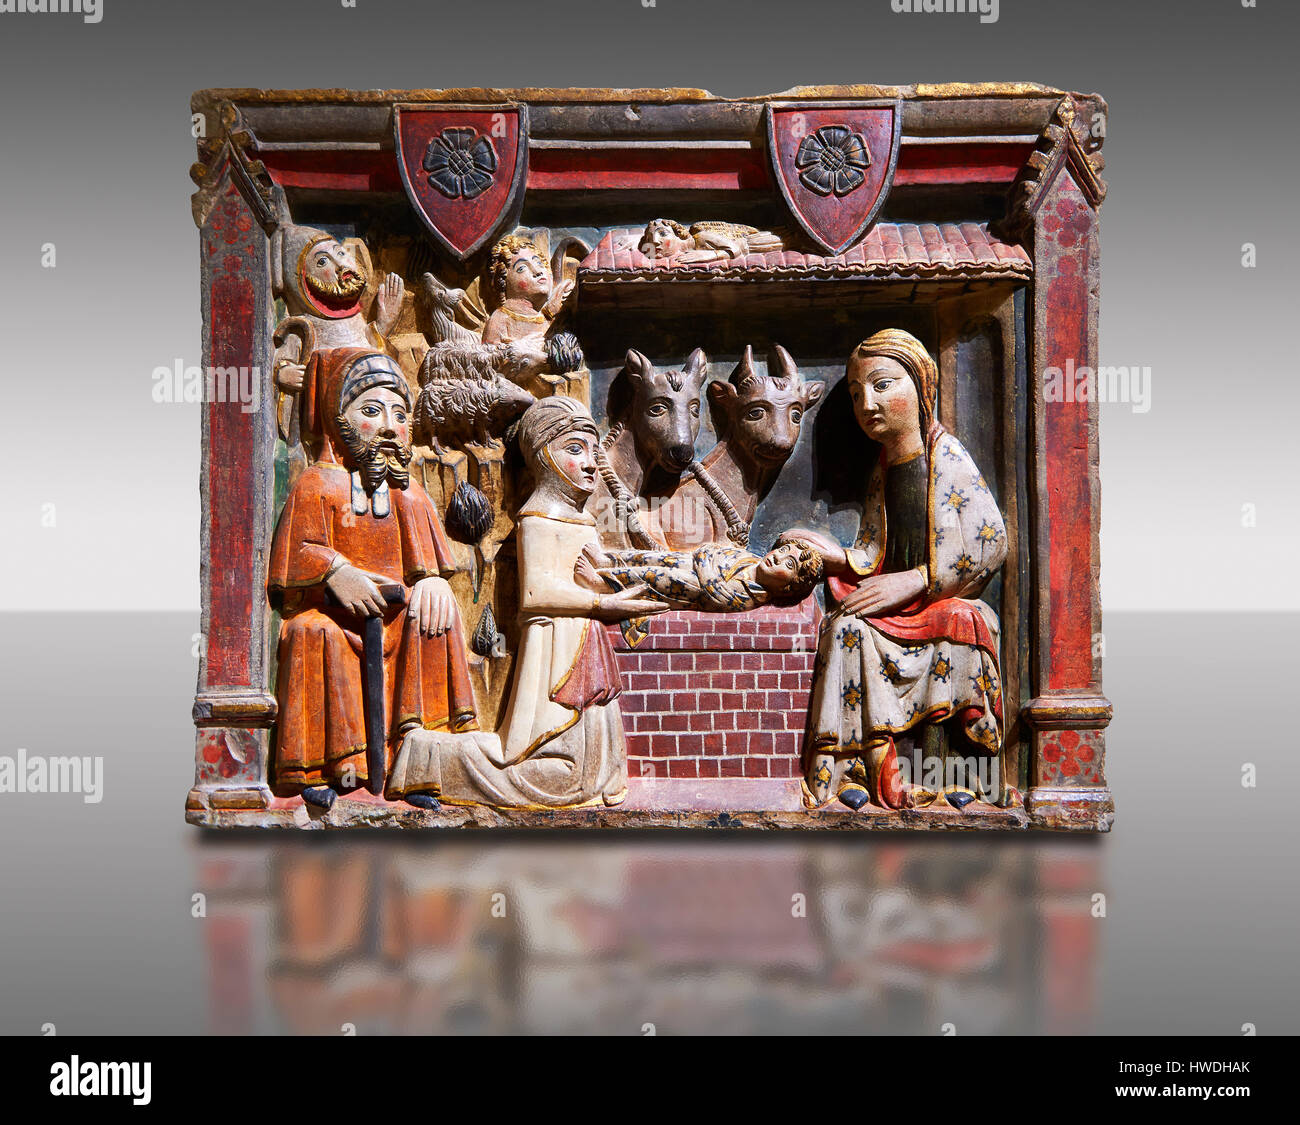 Gothic painted bas-relief of the Nativity by Master of Albesa. National Museum of Catalan Art, Barcelona, Spain, inv no: 017342-000 Stock Photo